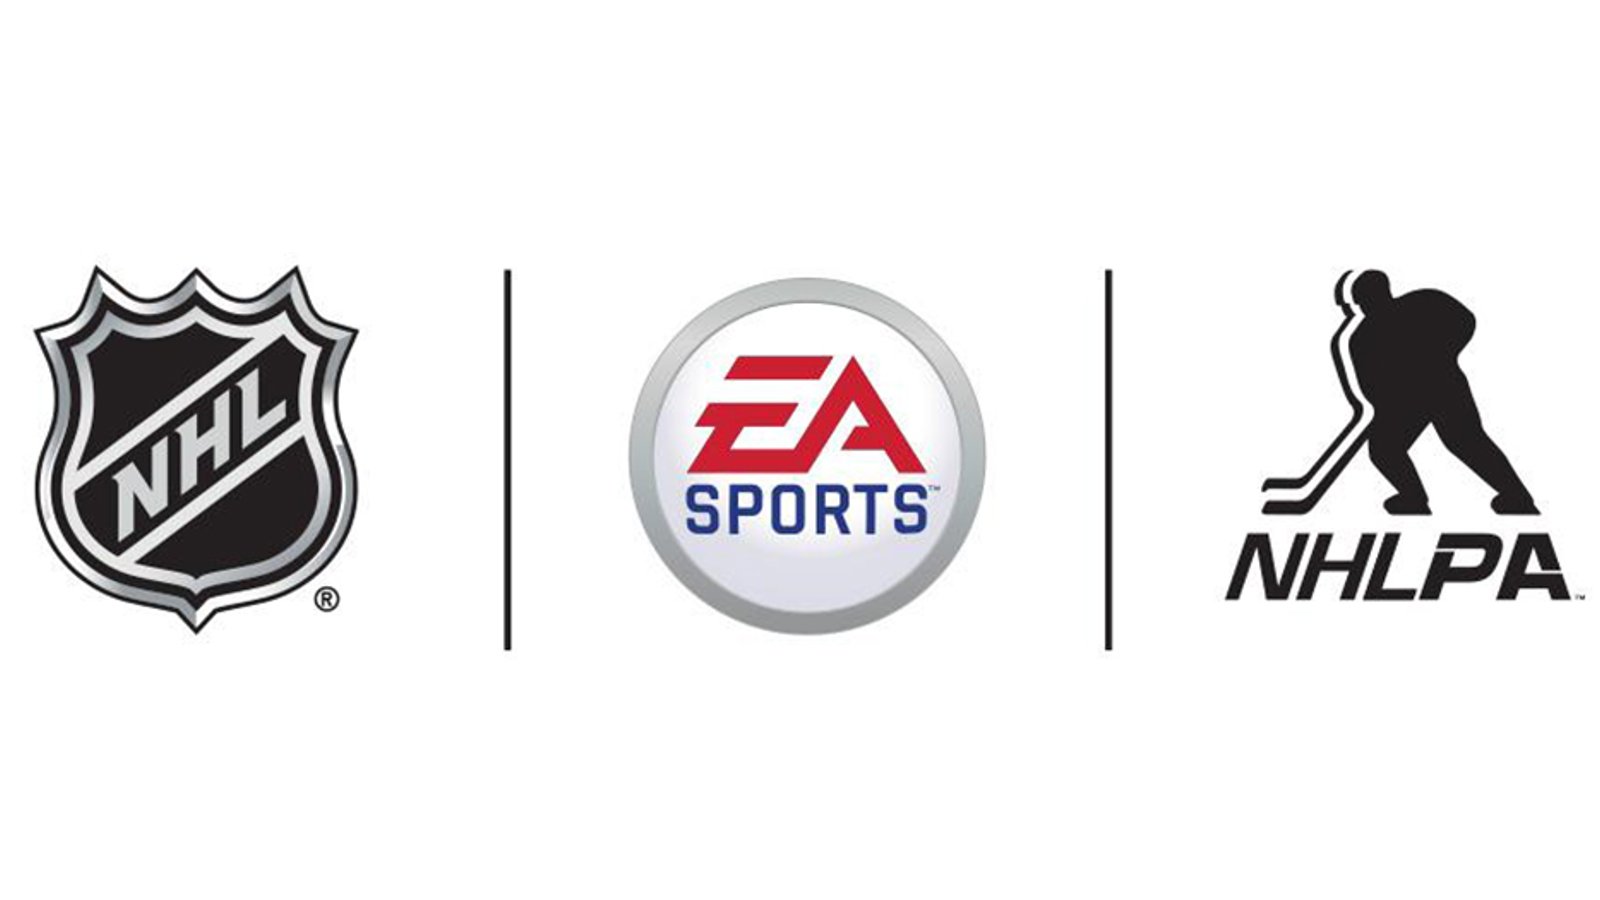 NHL and EA announce new partnership with respect to NHL game series